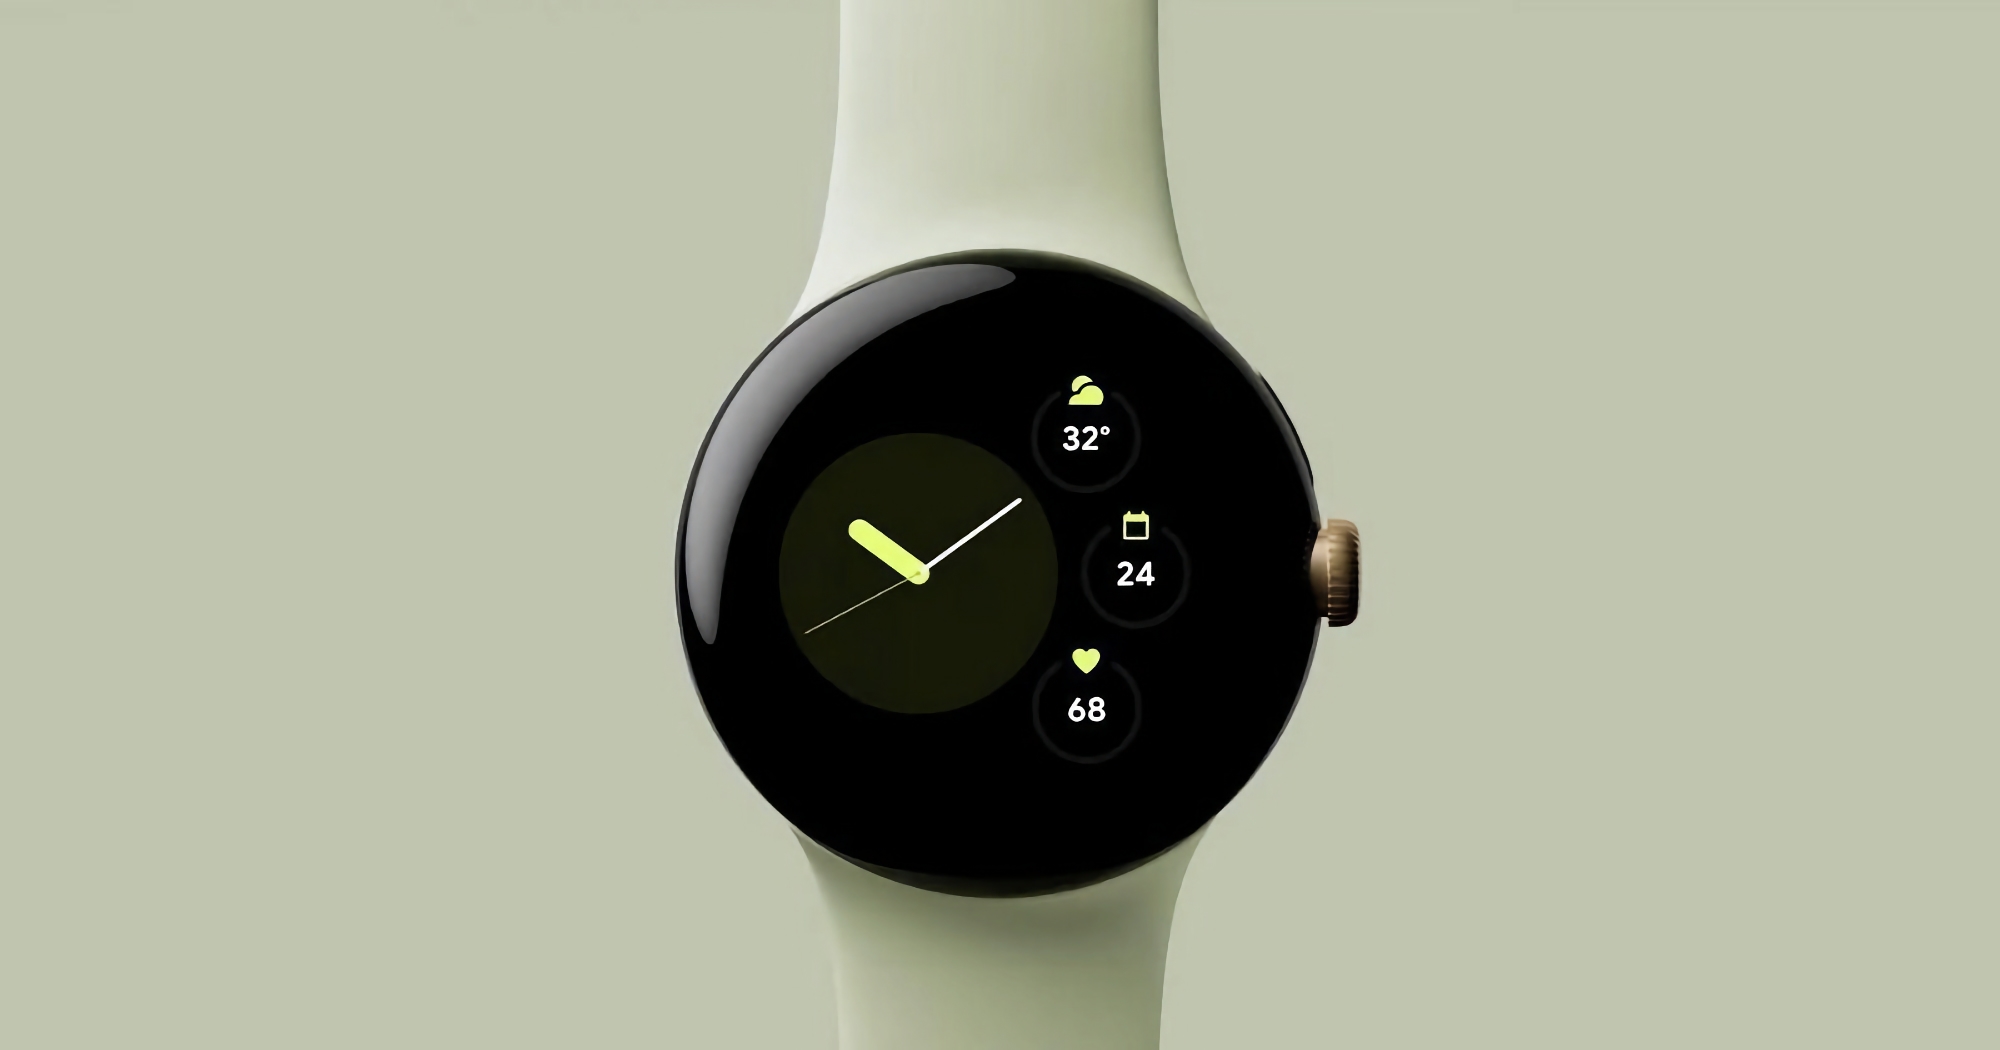 Rumour: Pixel Watch 2 gets improved battery life and runs on new Snapdragon chip